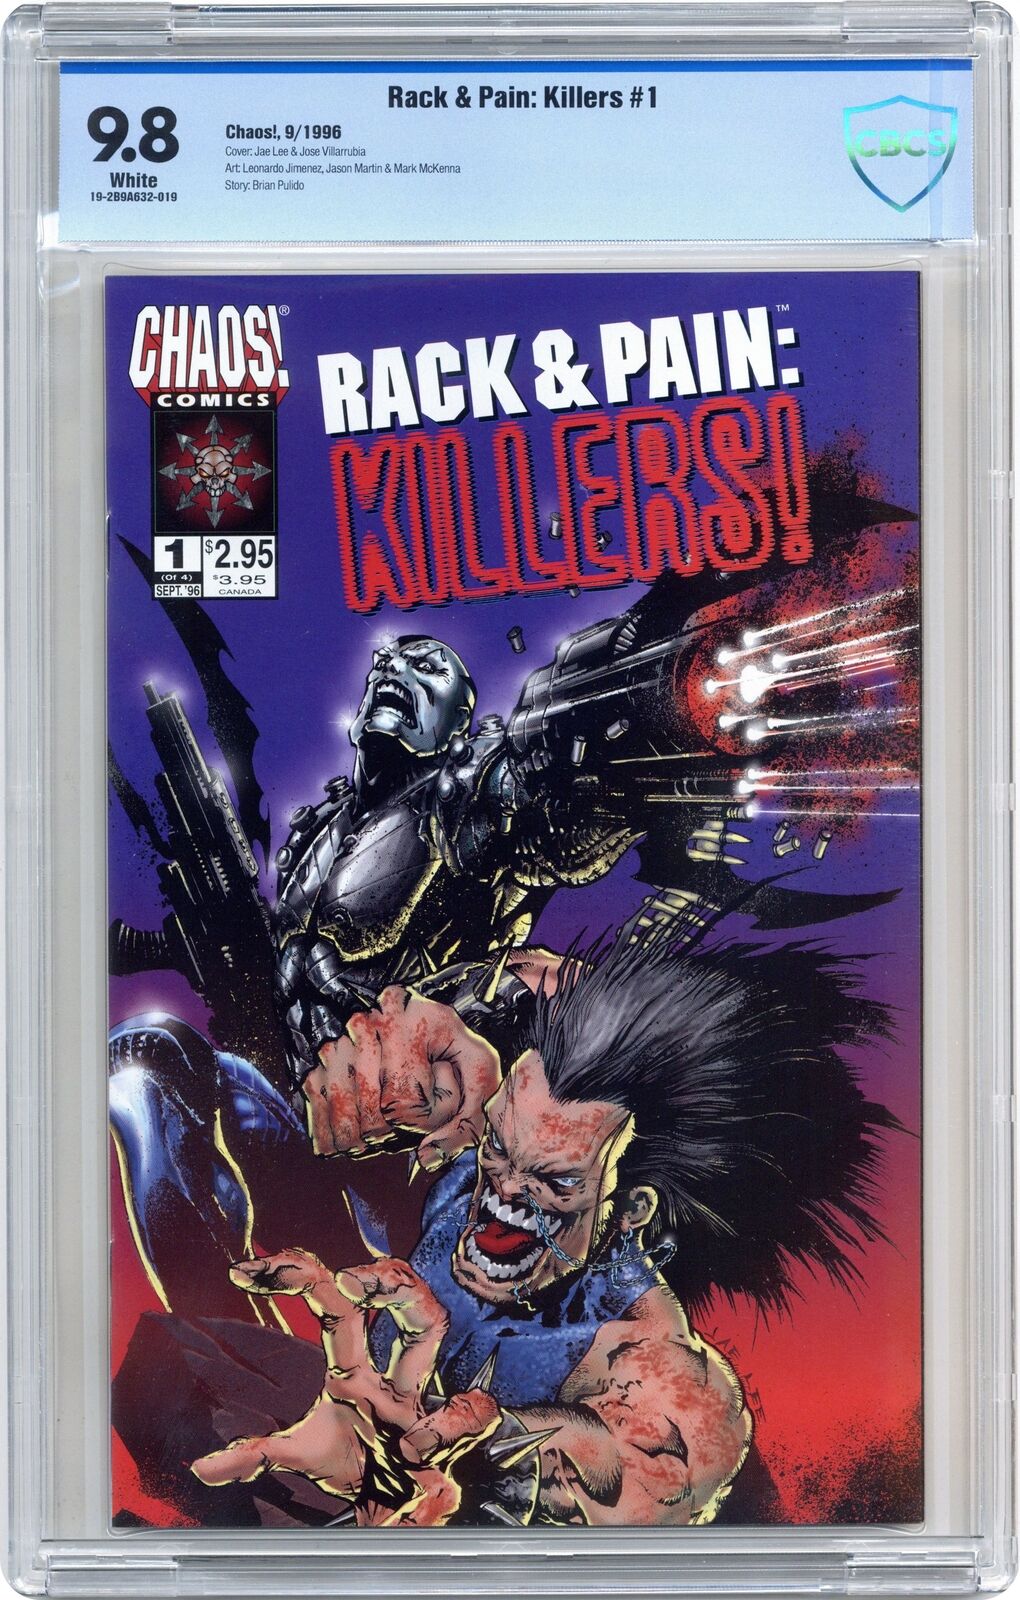 Rack and Pain: Killers #1 CBCS 9.8 1996 19-2B9A632-019